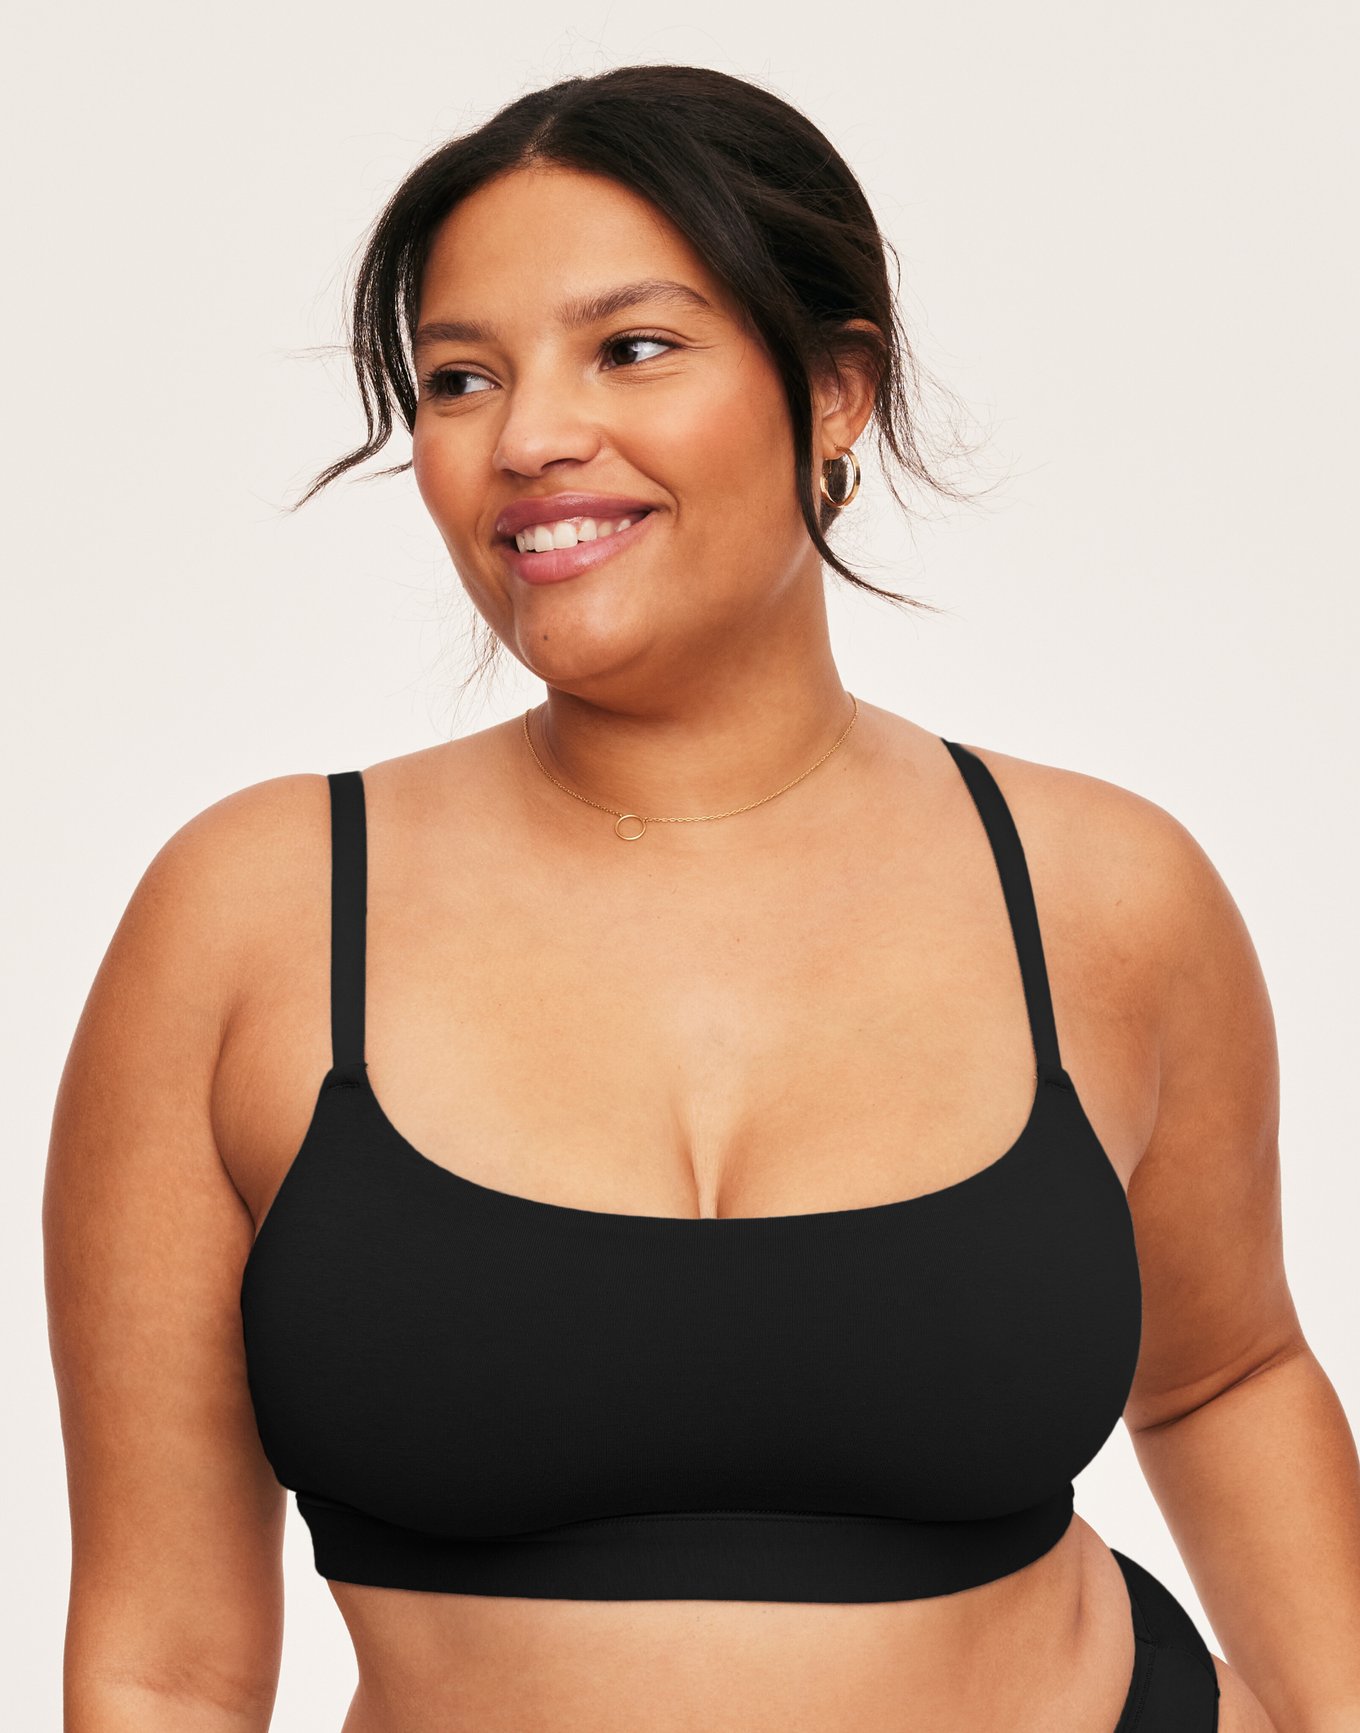 ELITE COLLECTION** Black Sports Bra styled with a V-Shaped Mesh